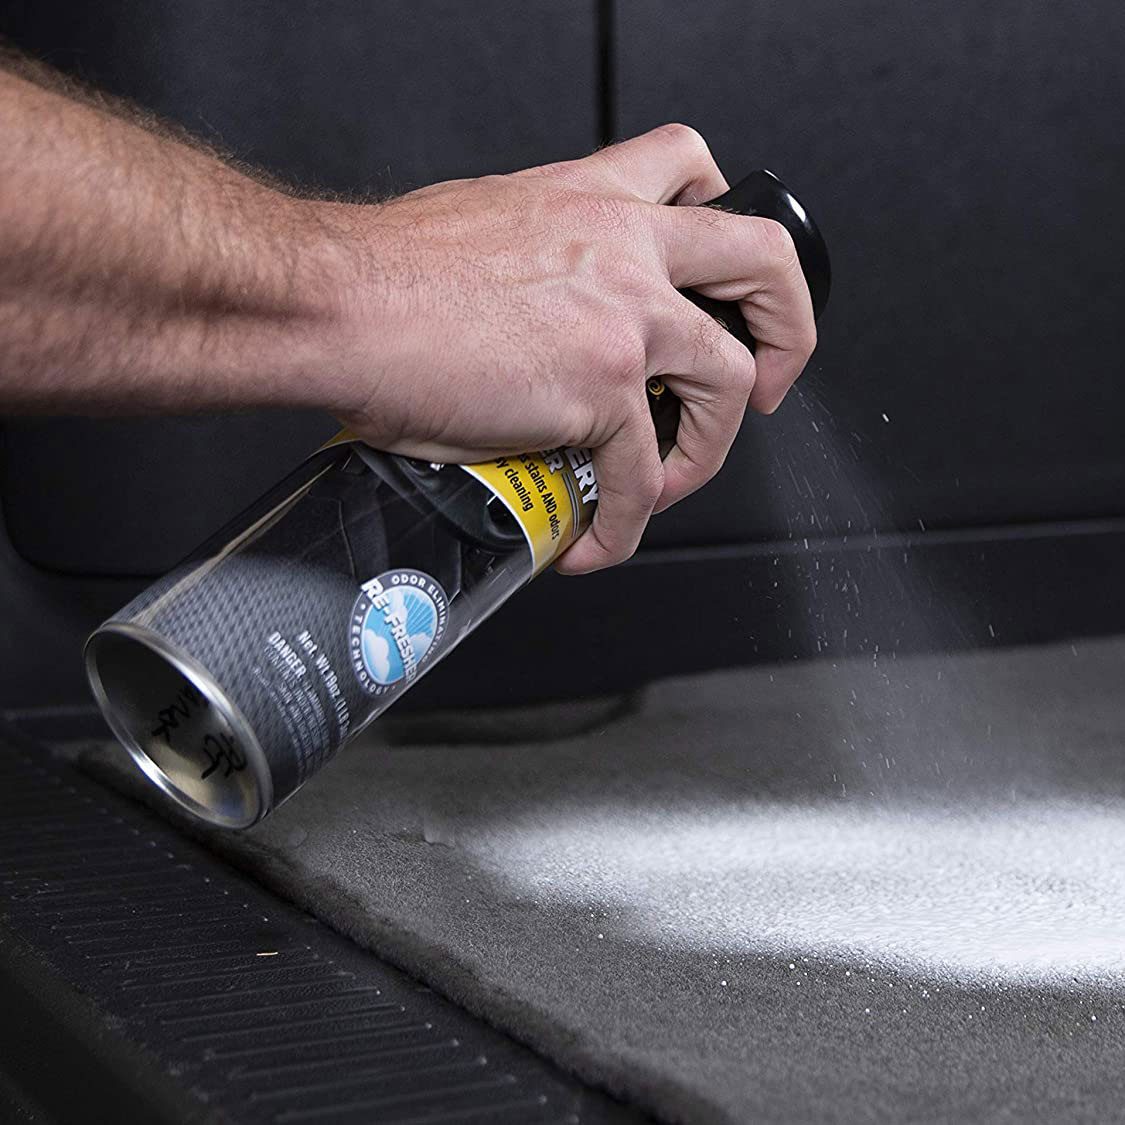 How to DIY Car Upholstery Stain Remover